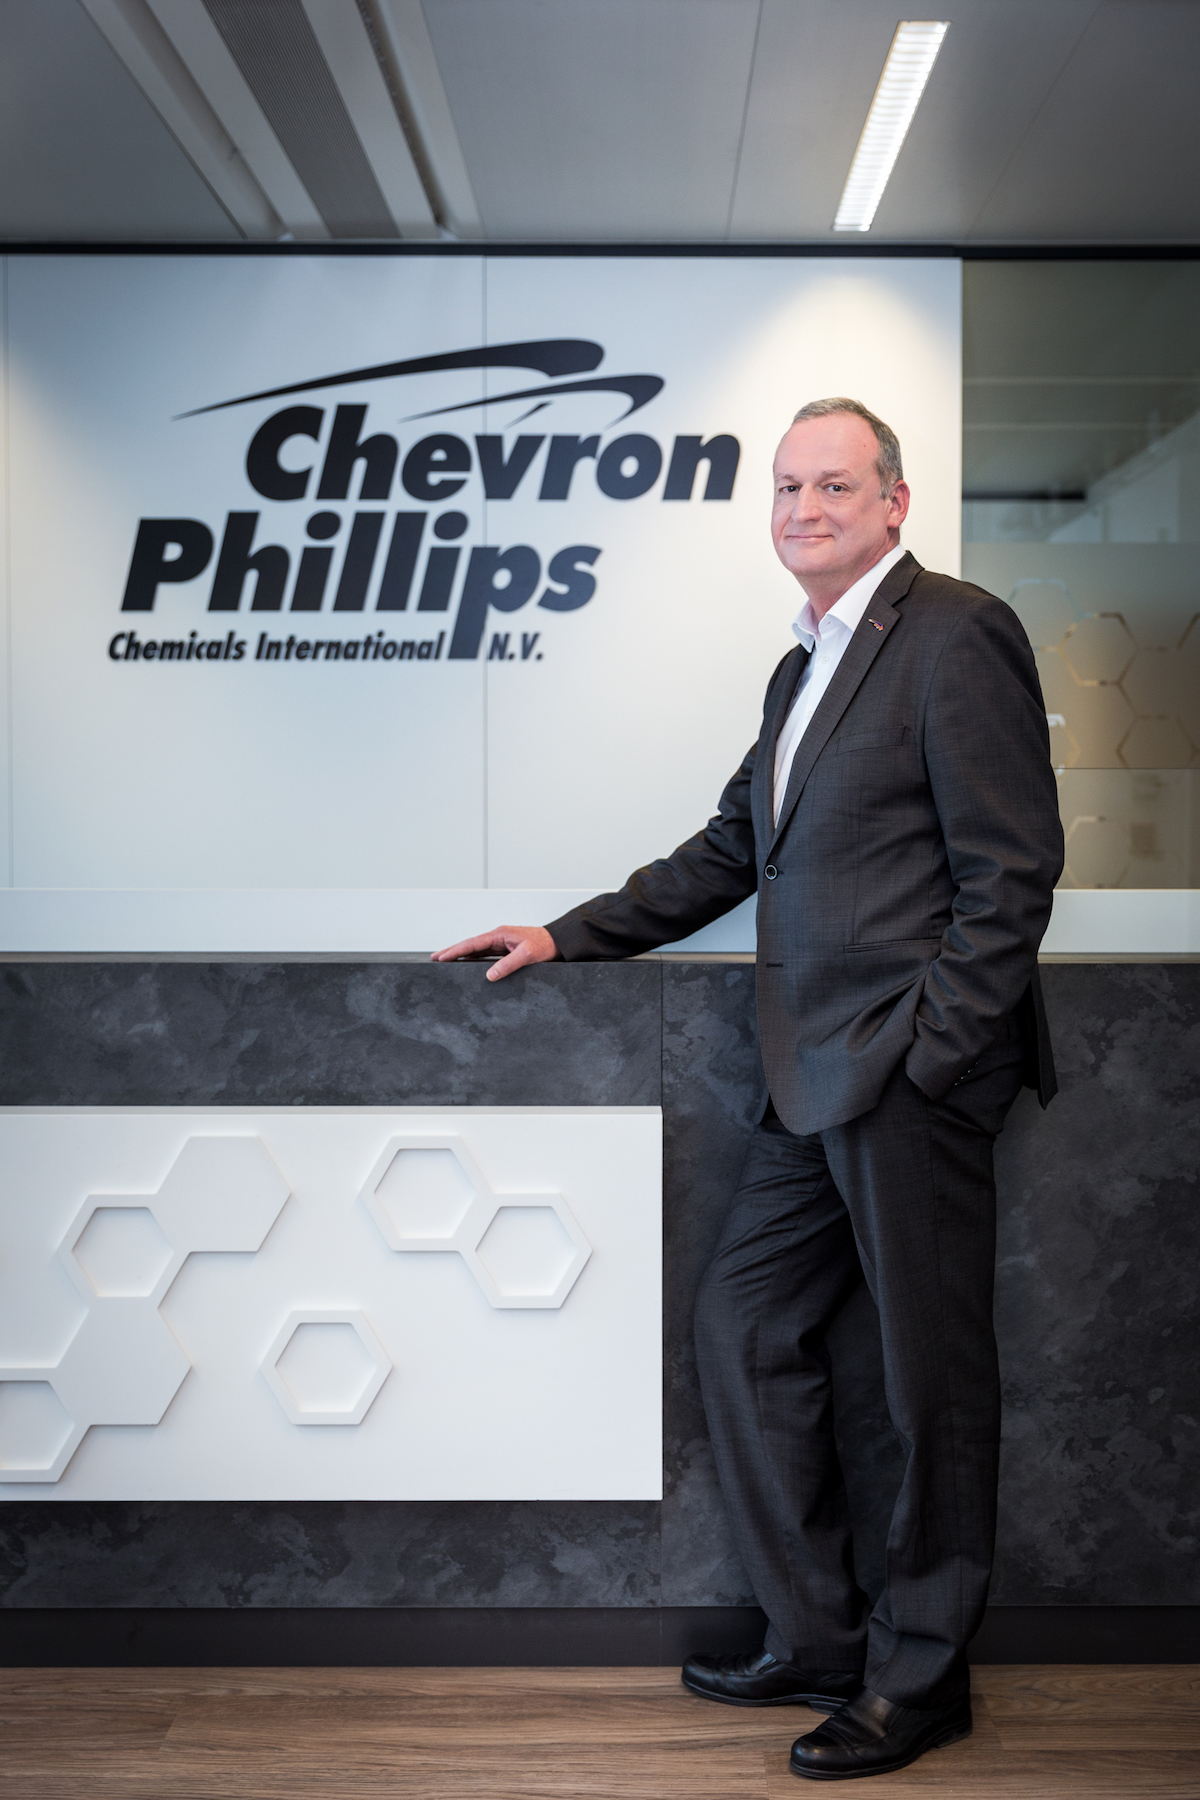 Benny Mermans EAME General Manager of Chevron Phillips Chemicals